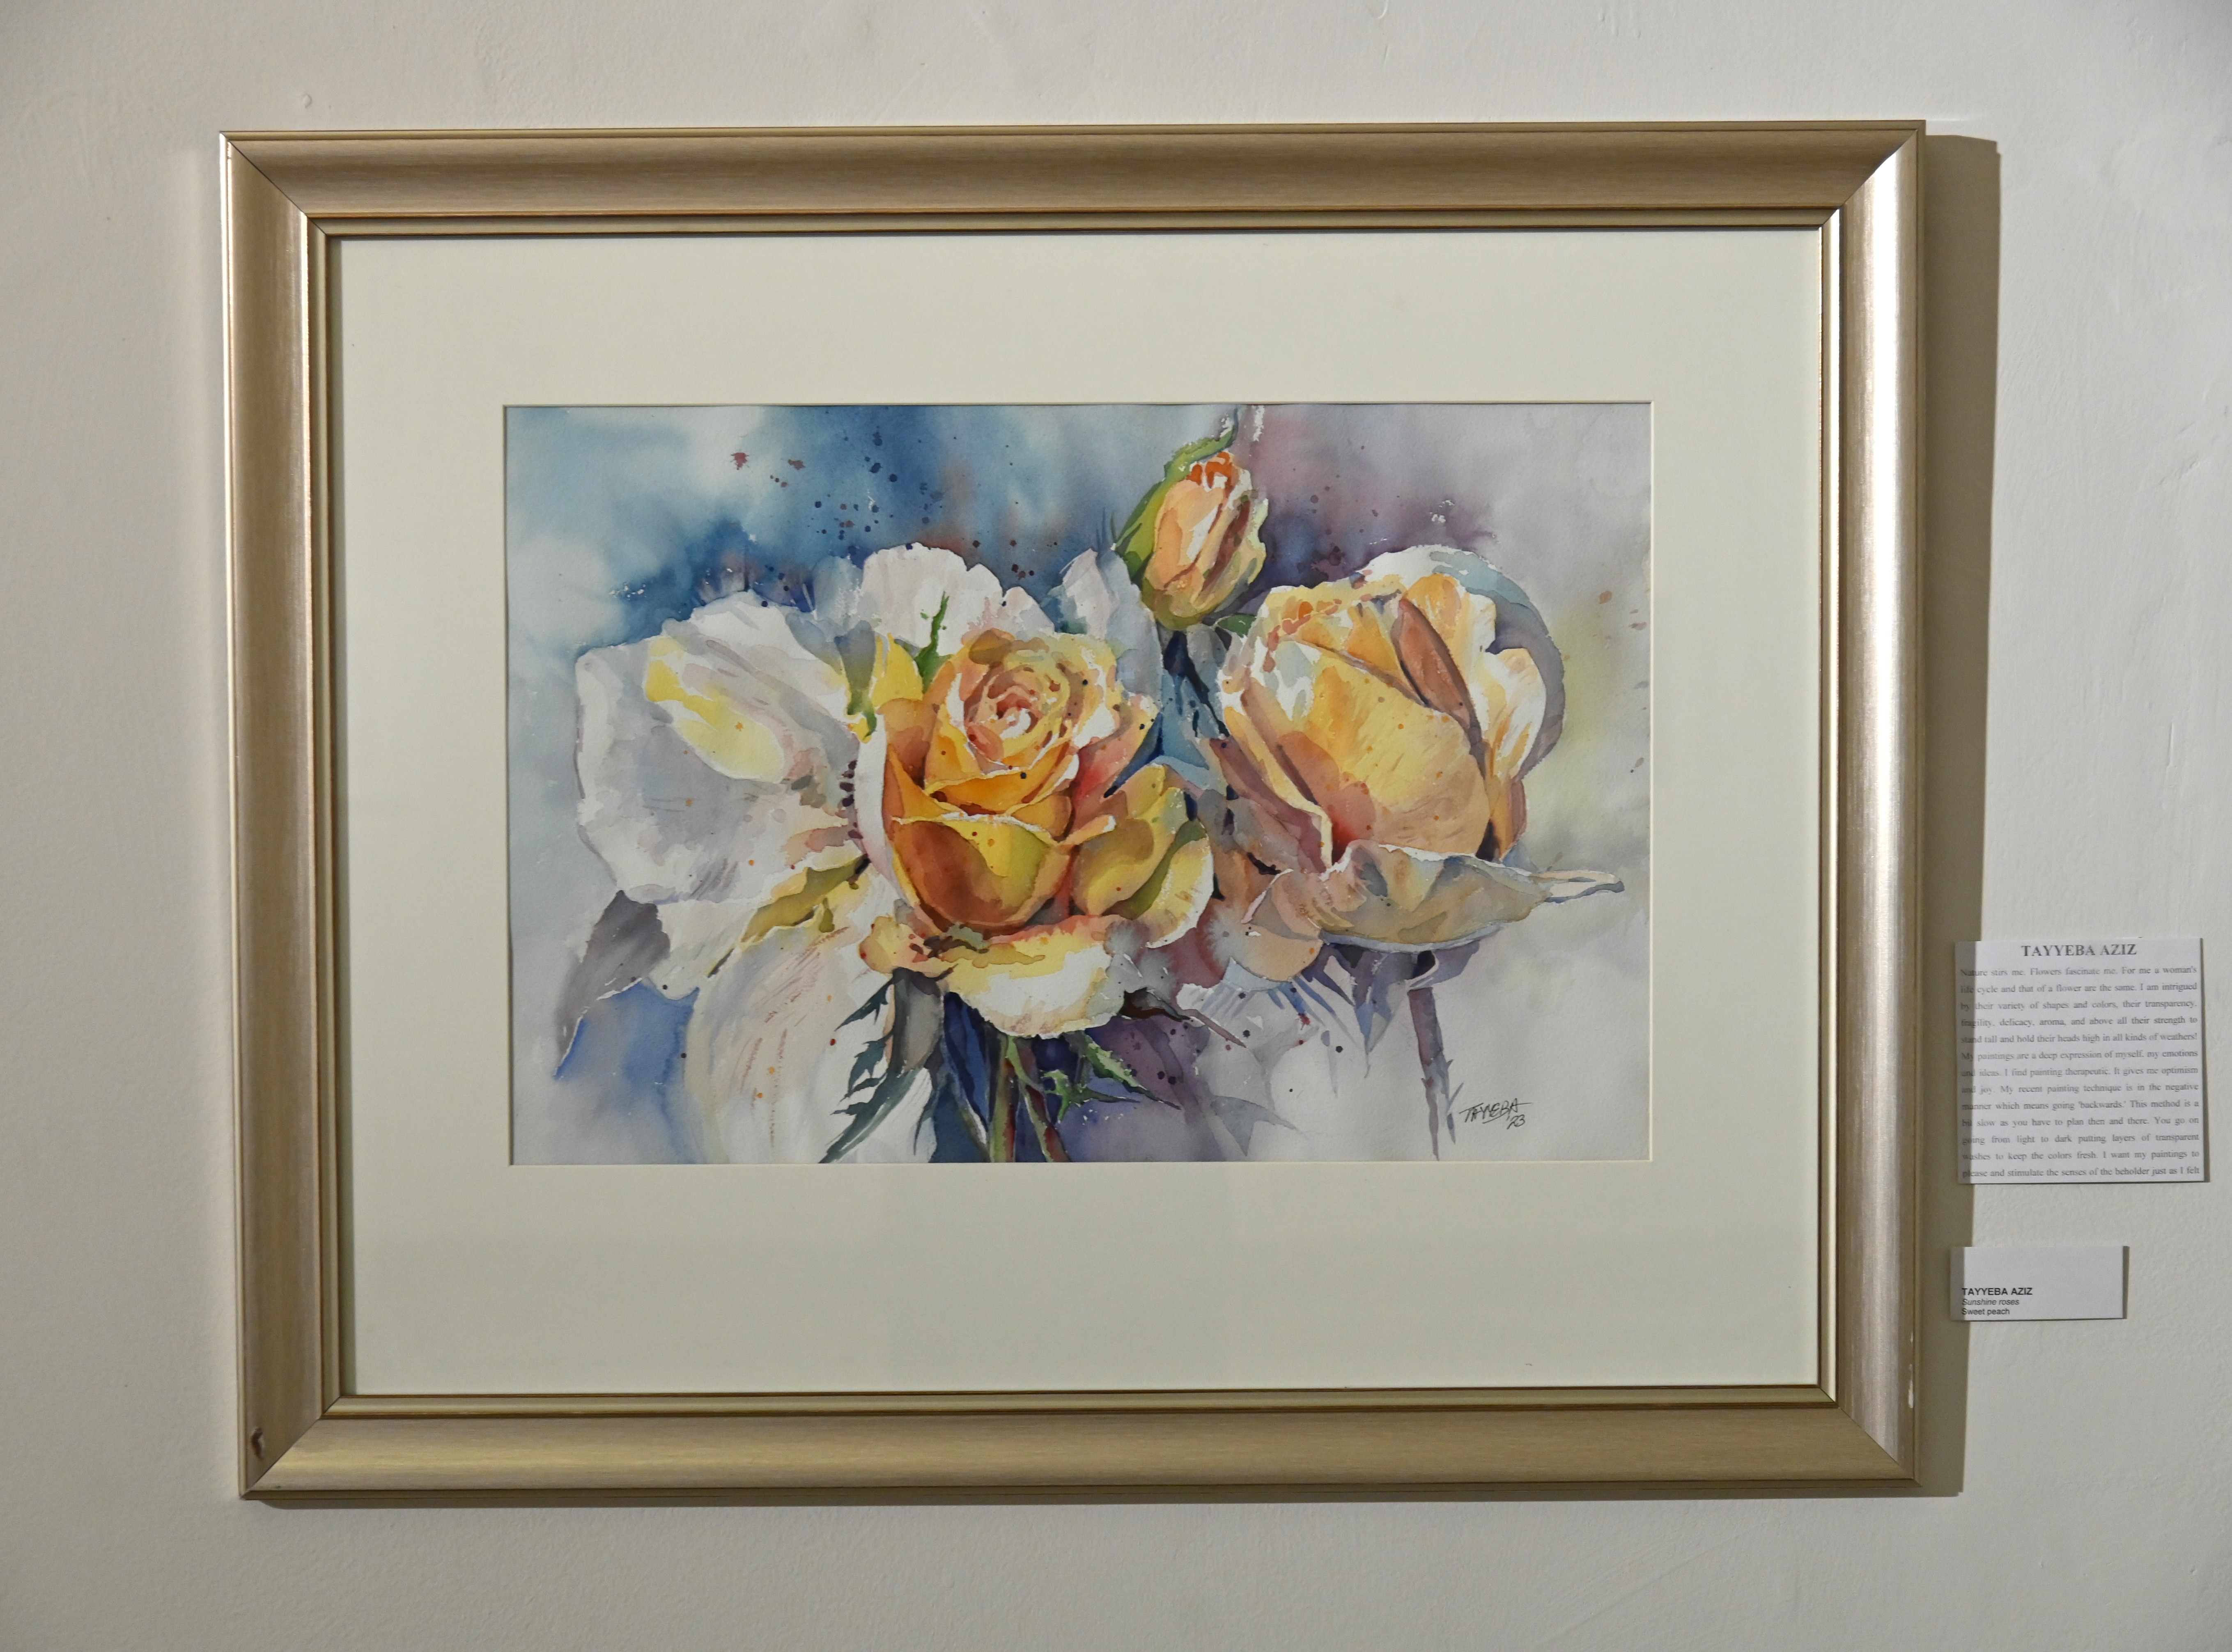 The painting of sunshine roses